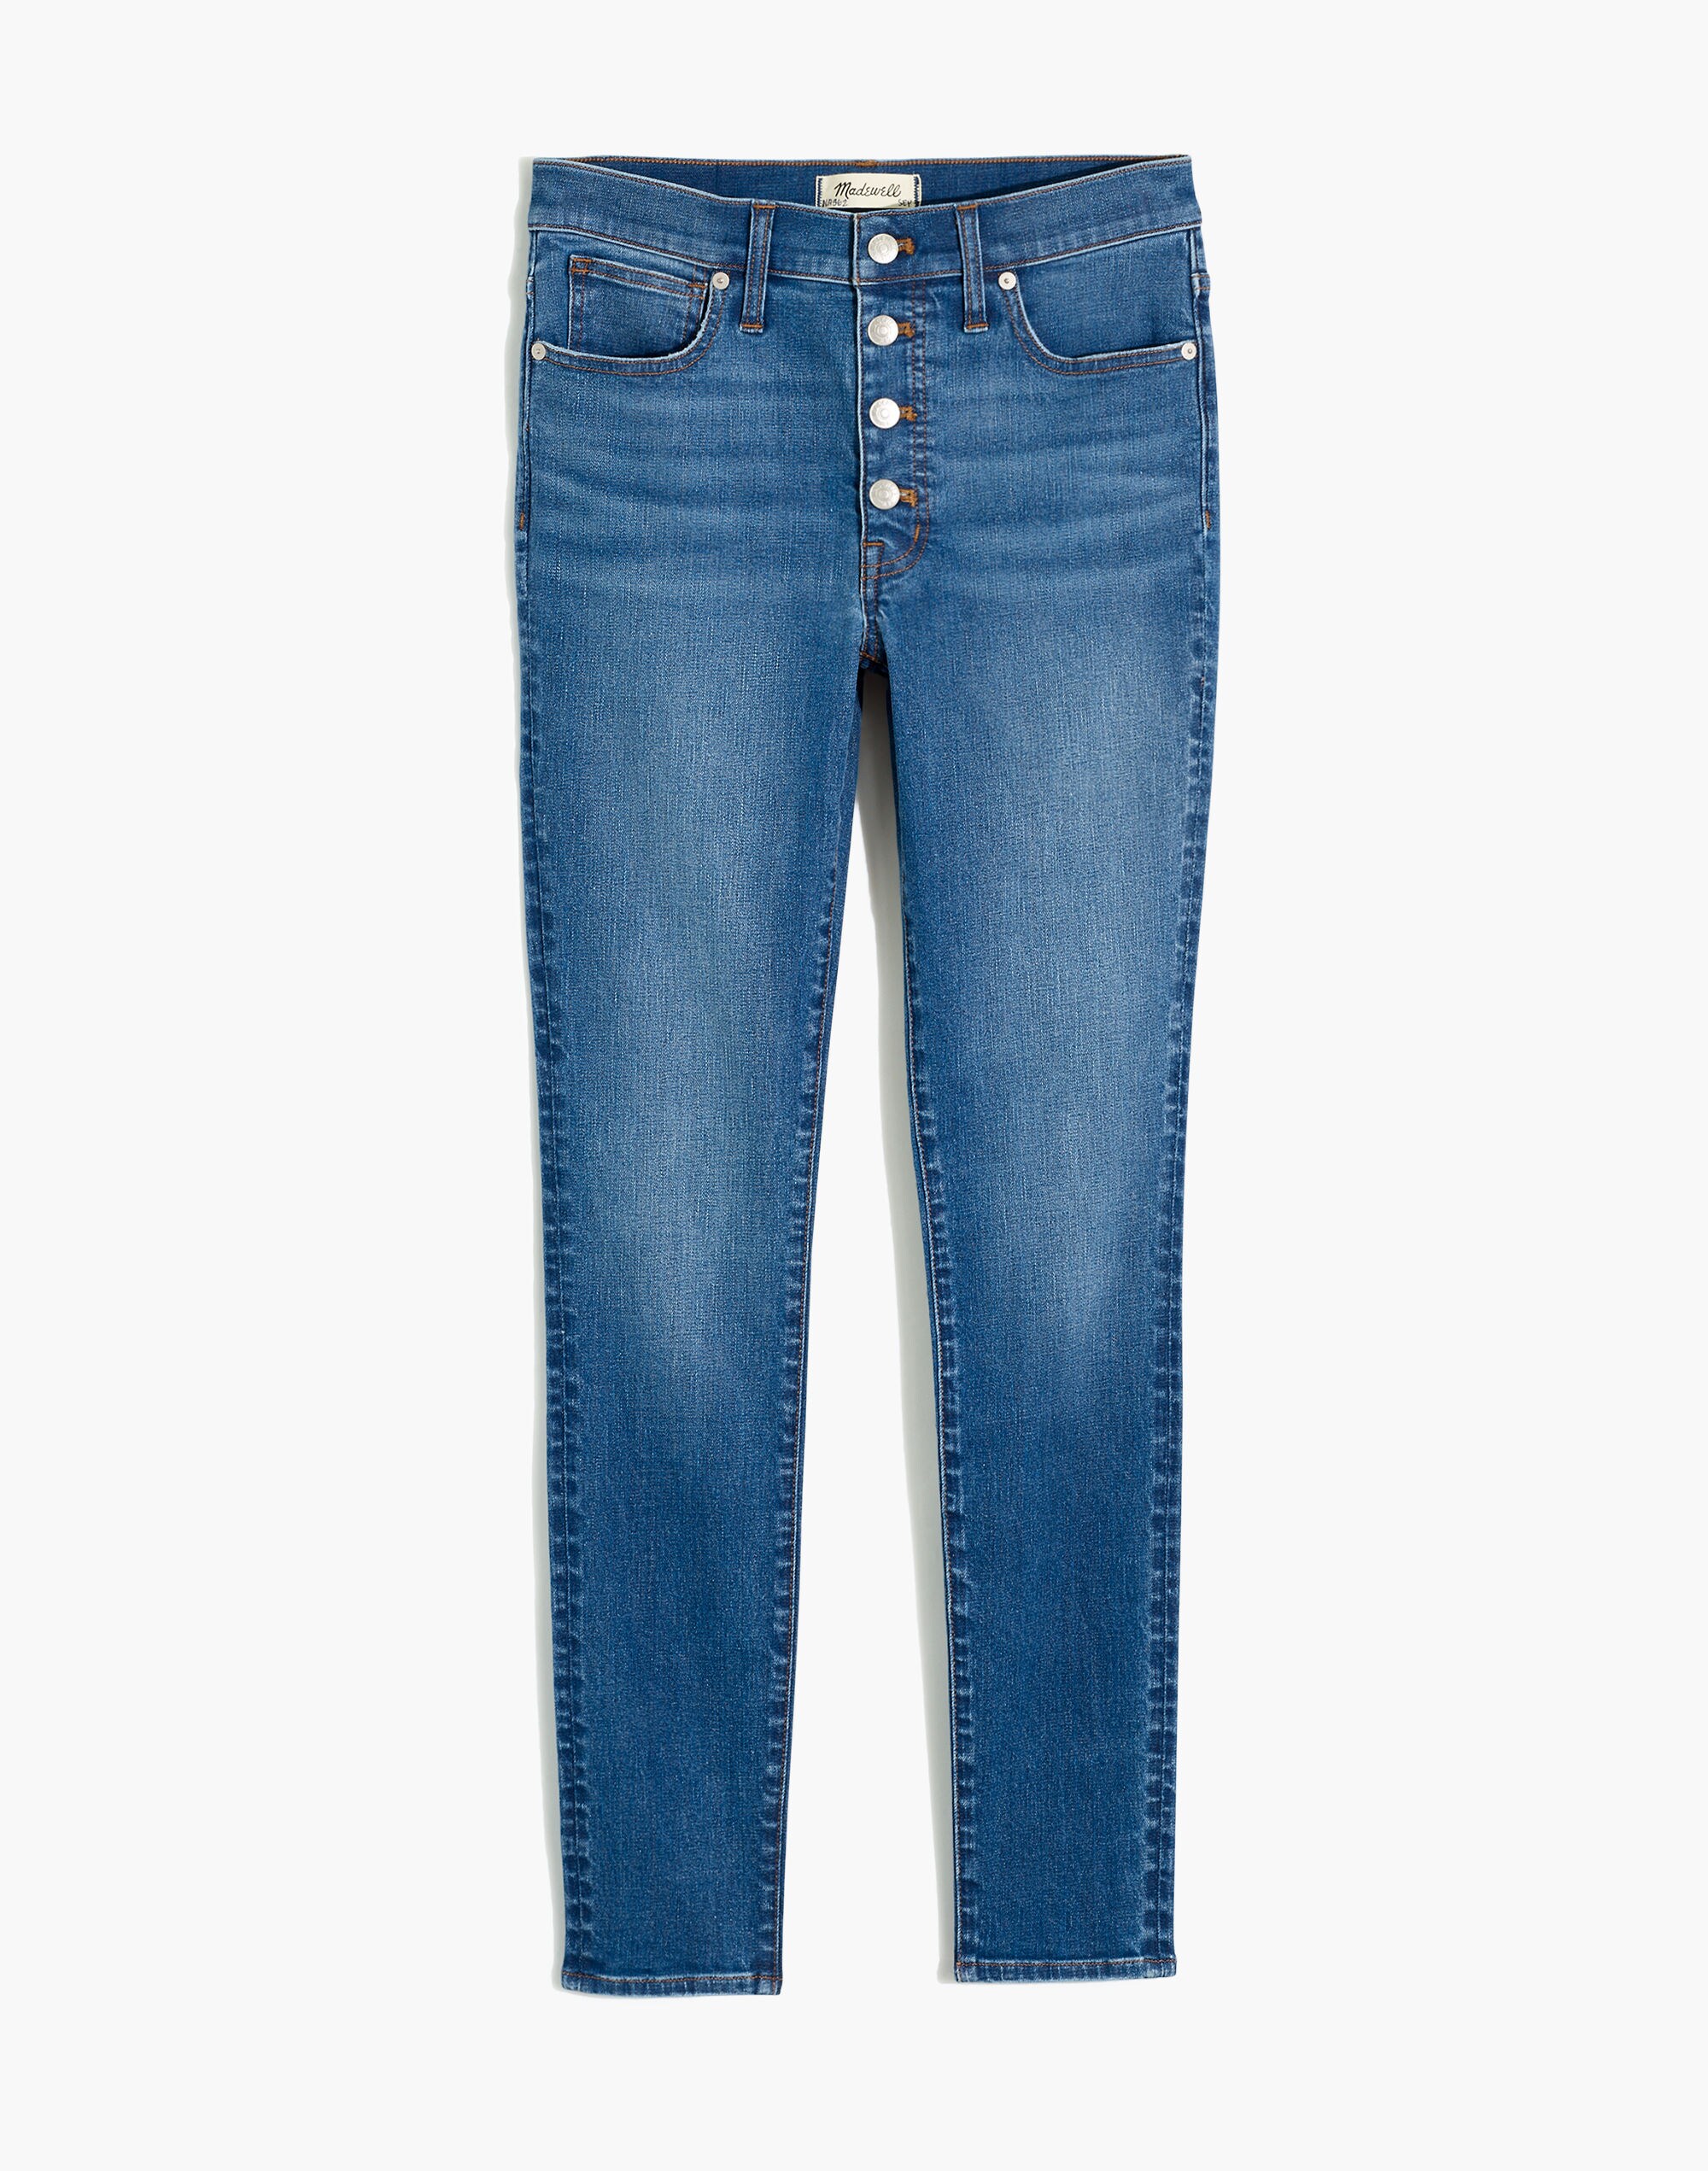 Madewell Jeans Style J9527 Tag Size W34 L32(31) see measuremnt